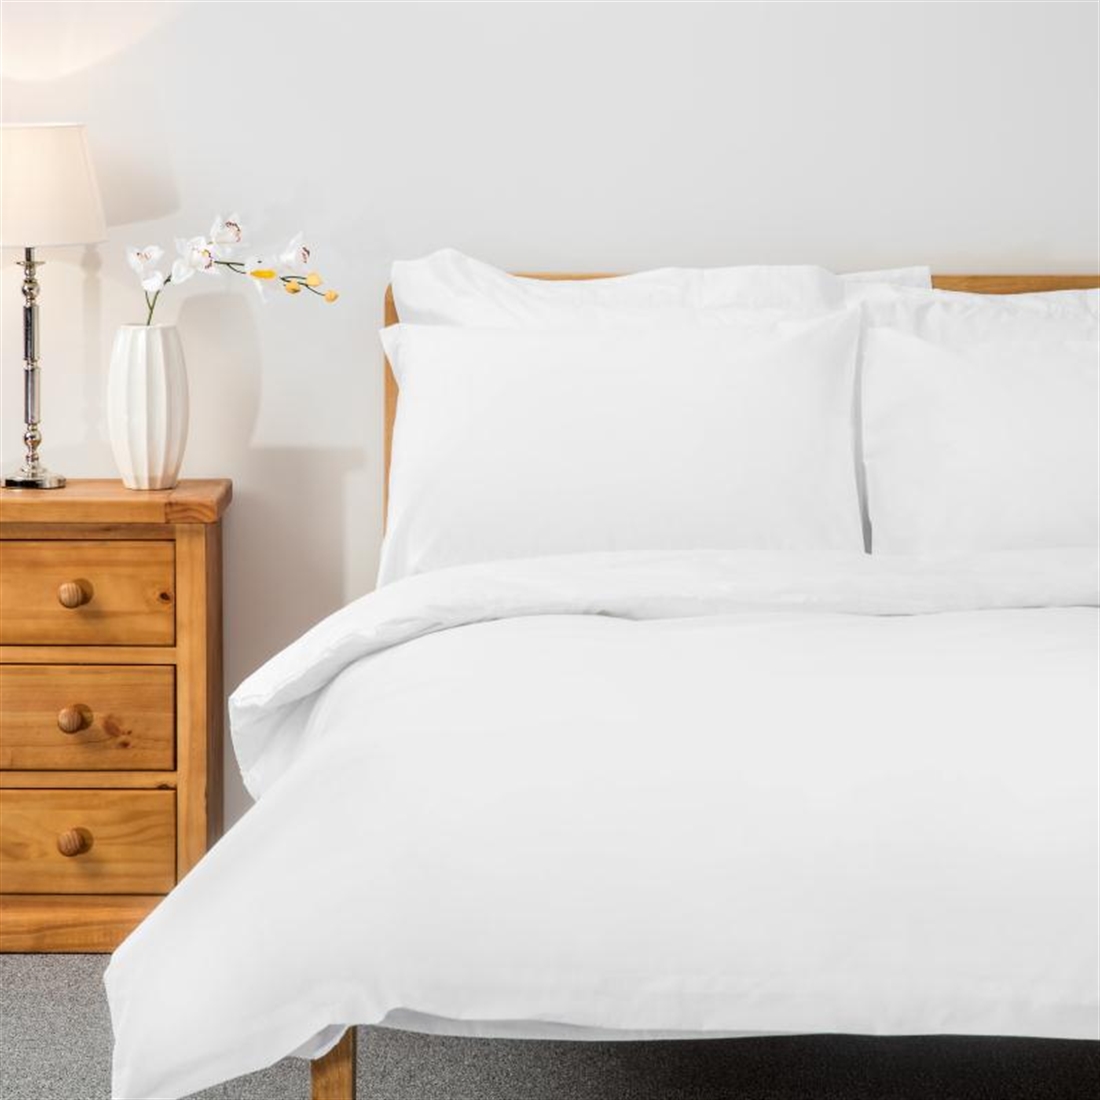 Mitre Comfort Percale Duvet Cover White King Size